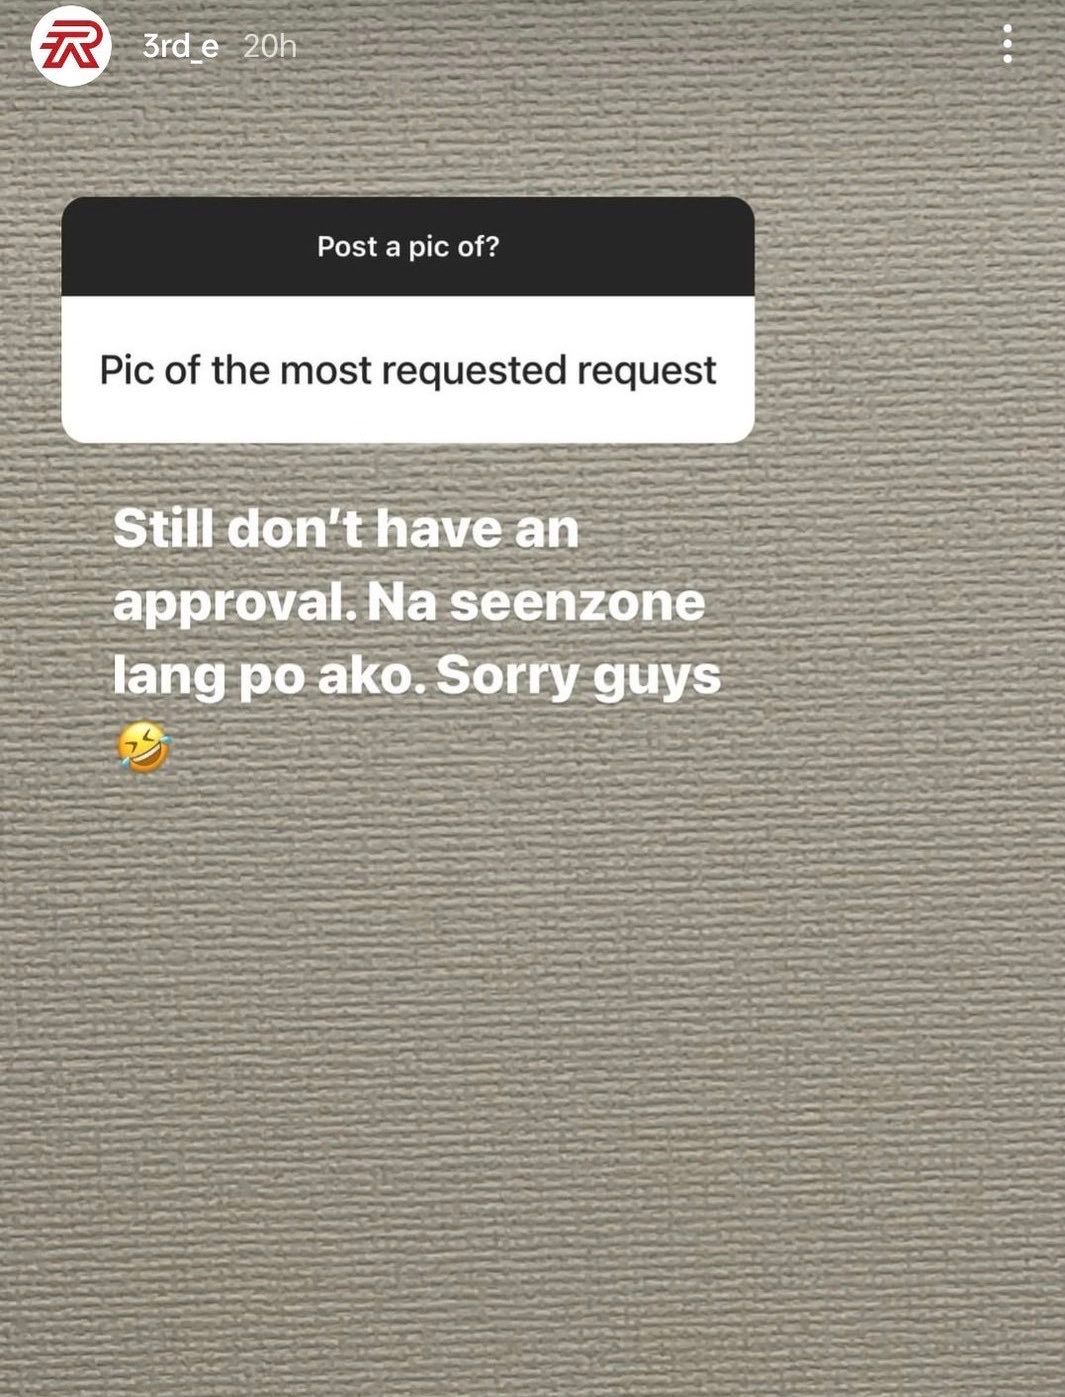 A screenshot from Thirdy Ravena's Instagram Stories.